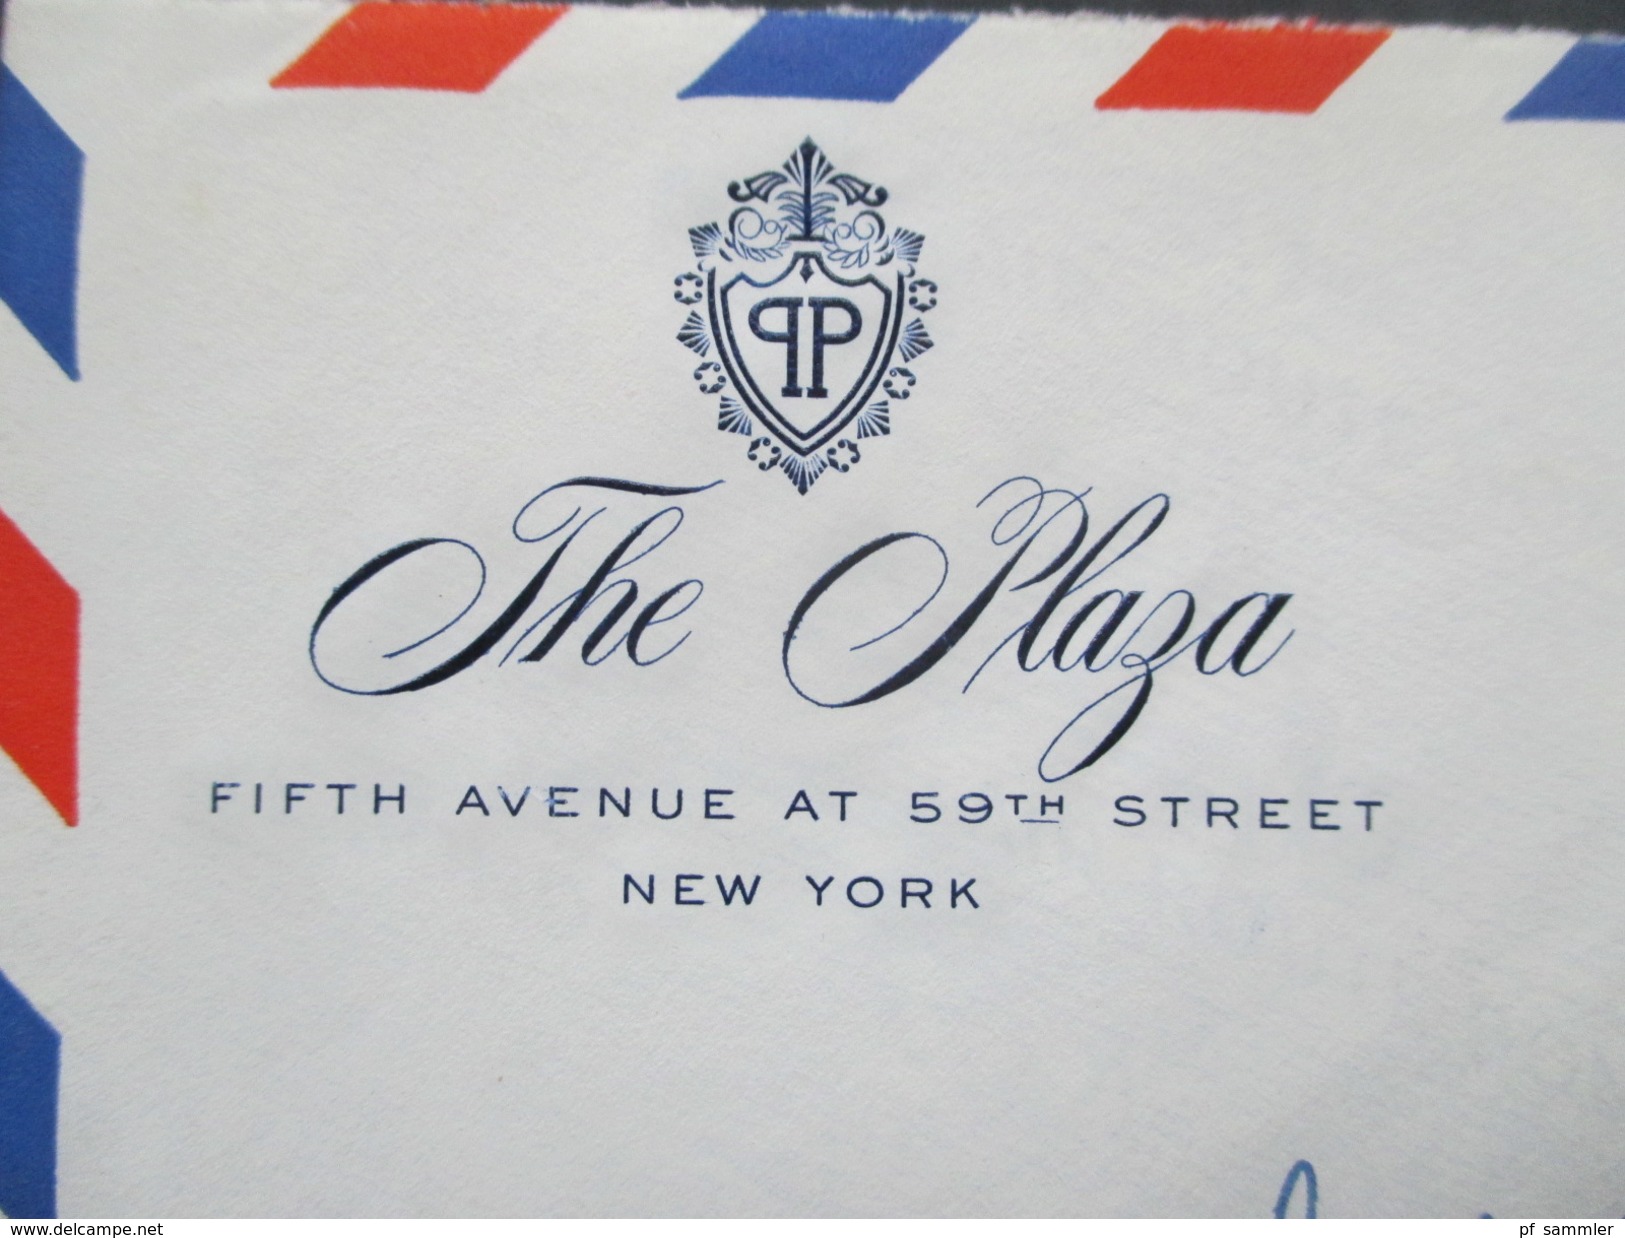 USA 1960 Hotelpost / Hotelumschlag The Plaza Fifth Avenue At 59th Street New York. Nach London GB - Covers & Documents